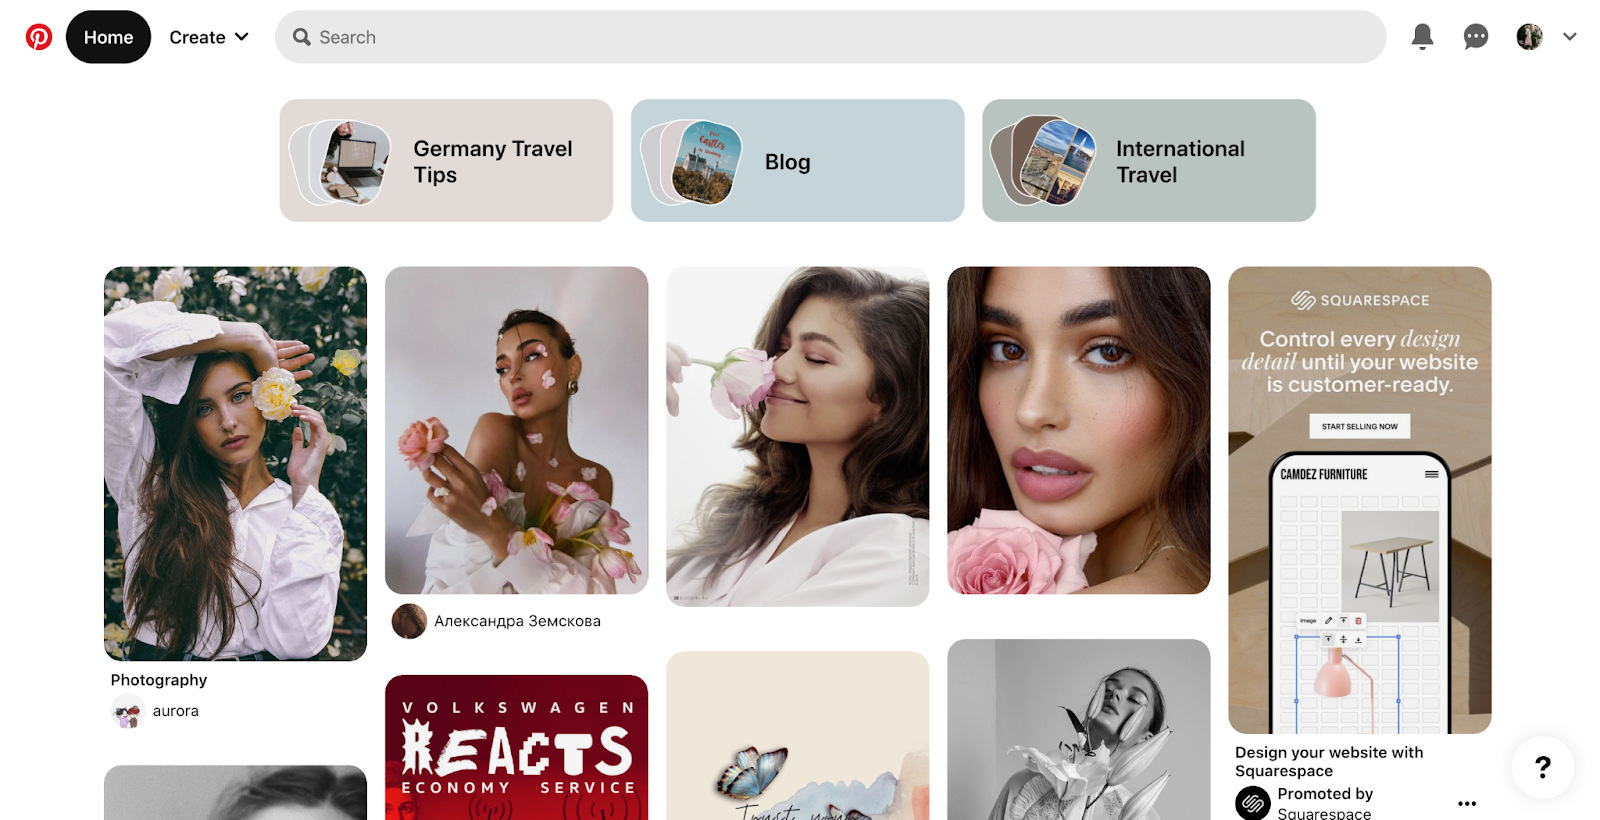 A screenshot of the Pinterest homepage with various content recommendations